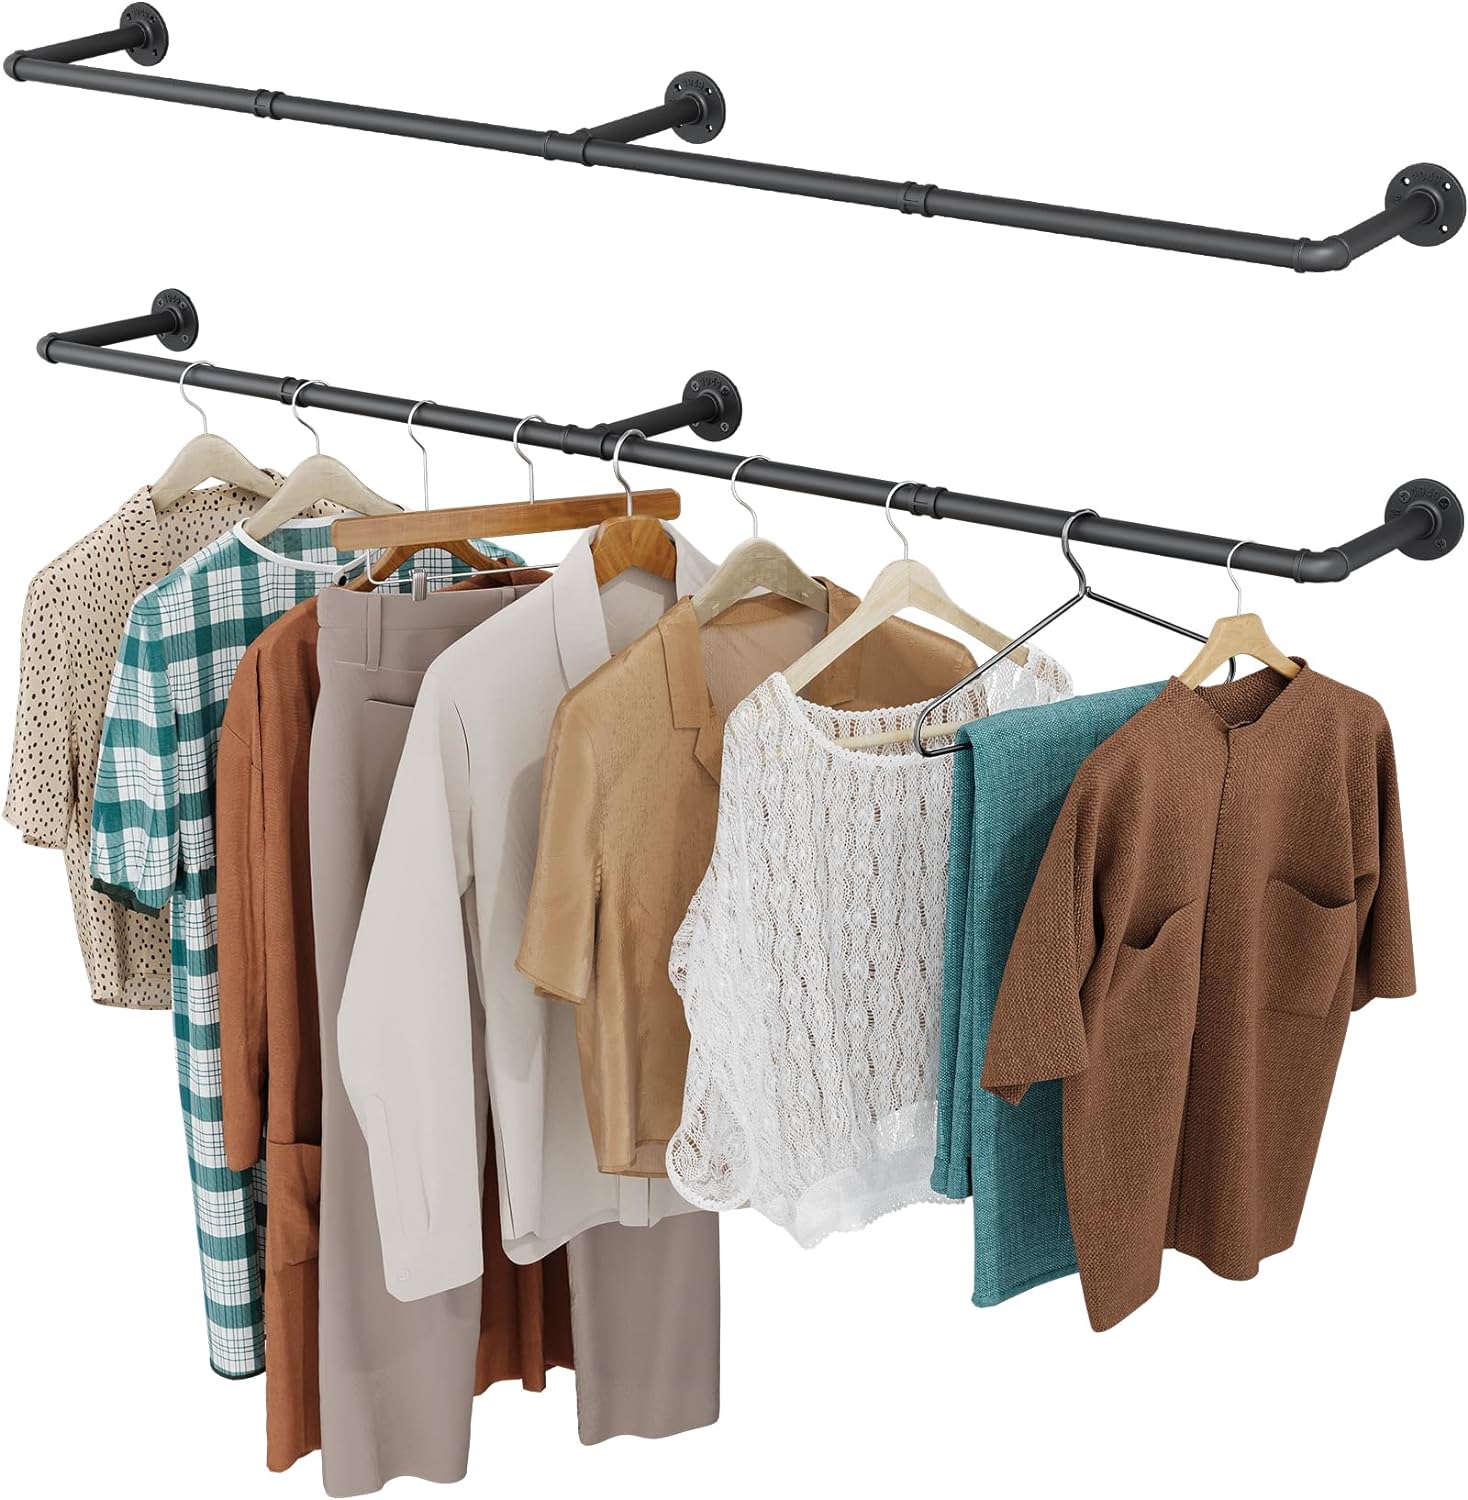 65.7″ Industrial Pipe Clothing Rack 2 Pack for Clothes, Wall Mounted Heavy Duty Space Saving Garment Rack for Closet Storage